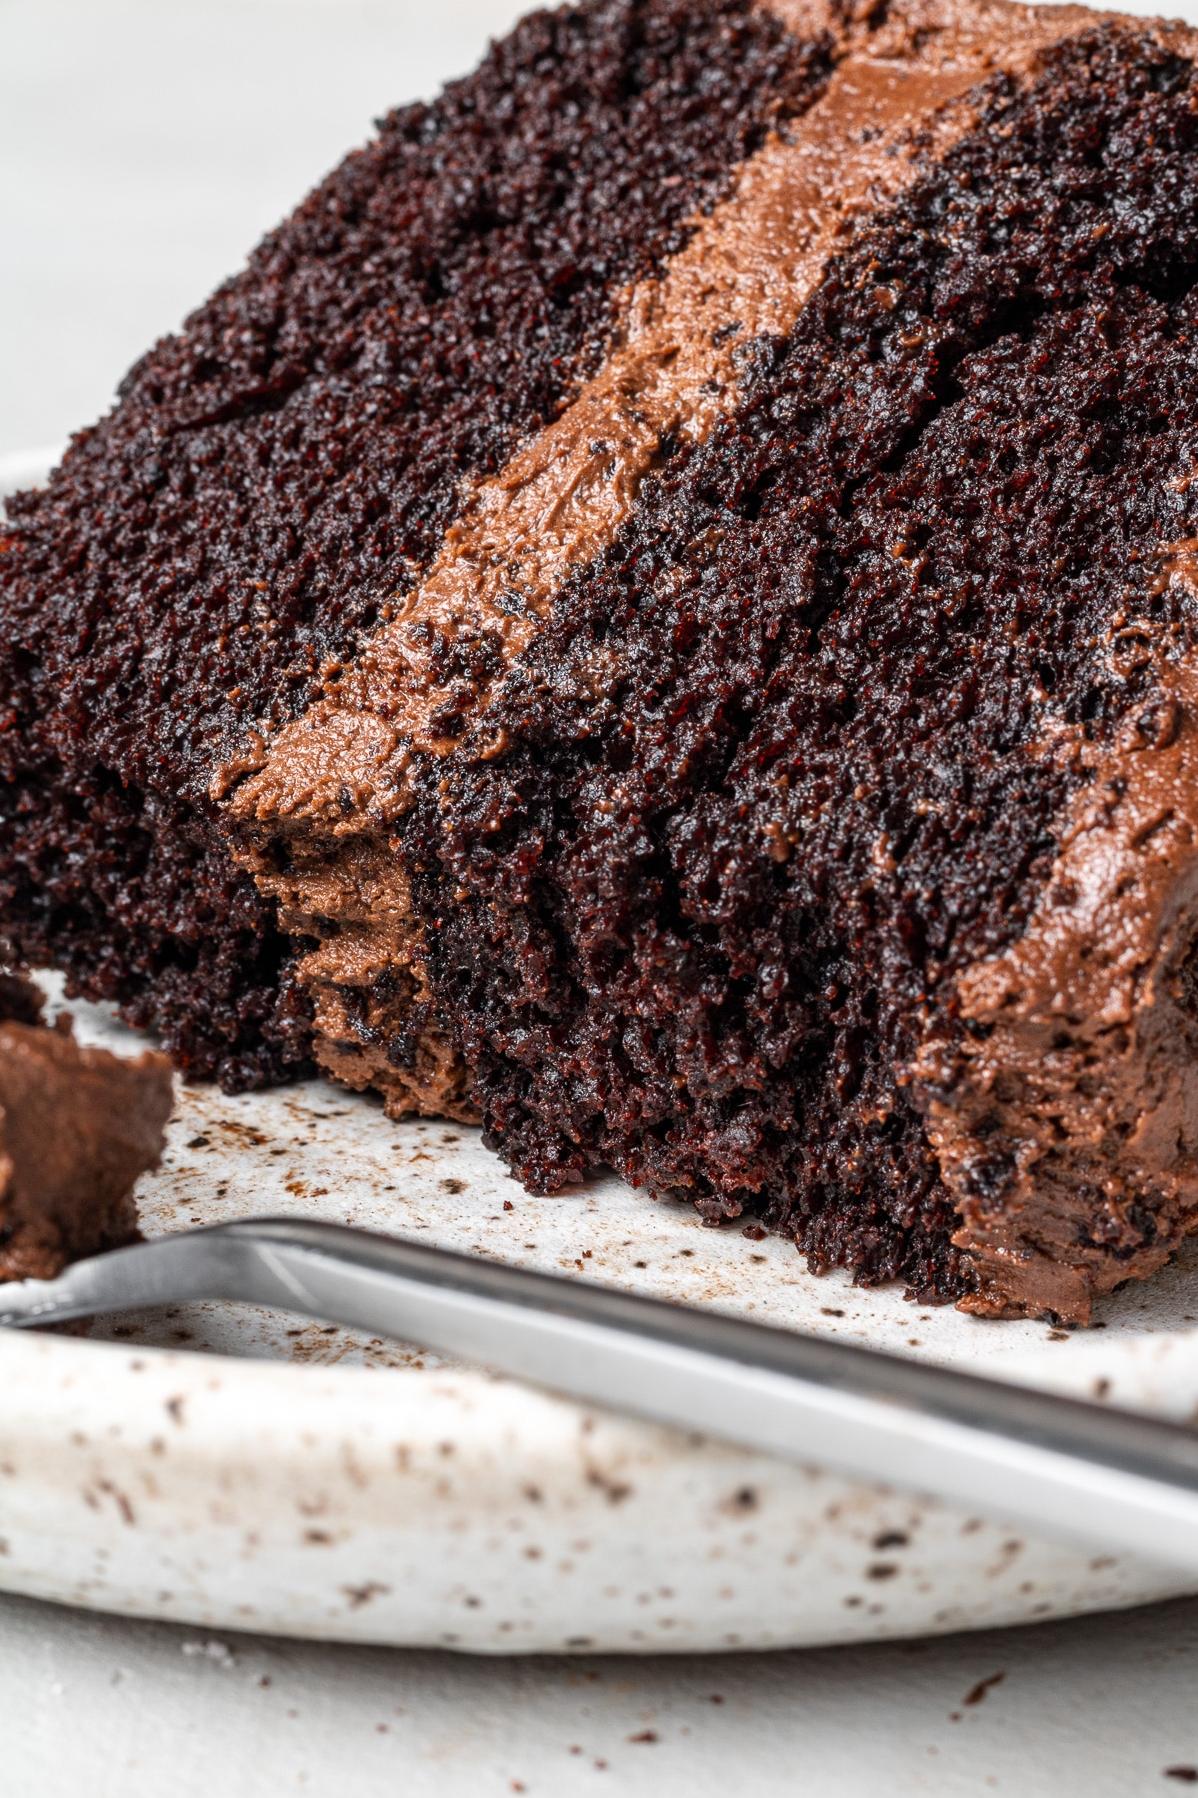  No milk? No problem. Our chocolate cake is dairy-free and still chocolatey and moist.